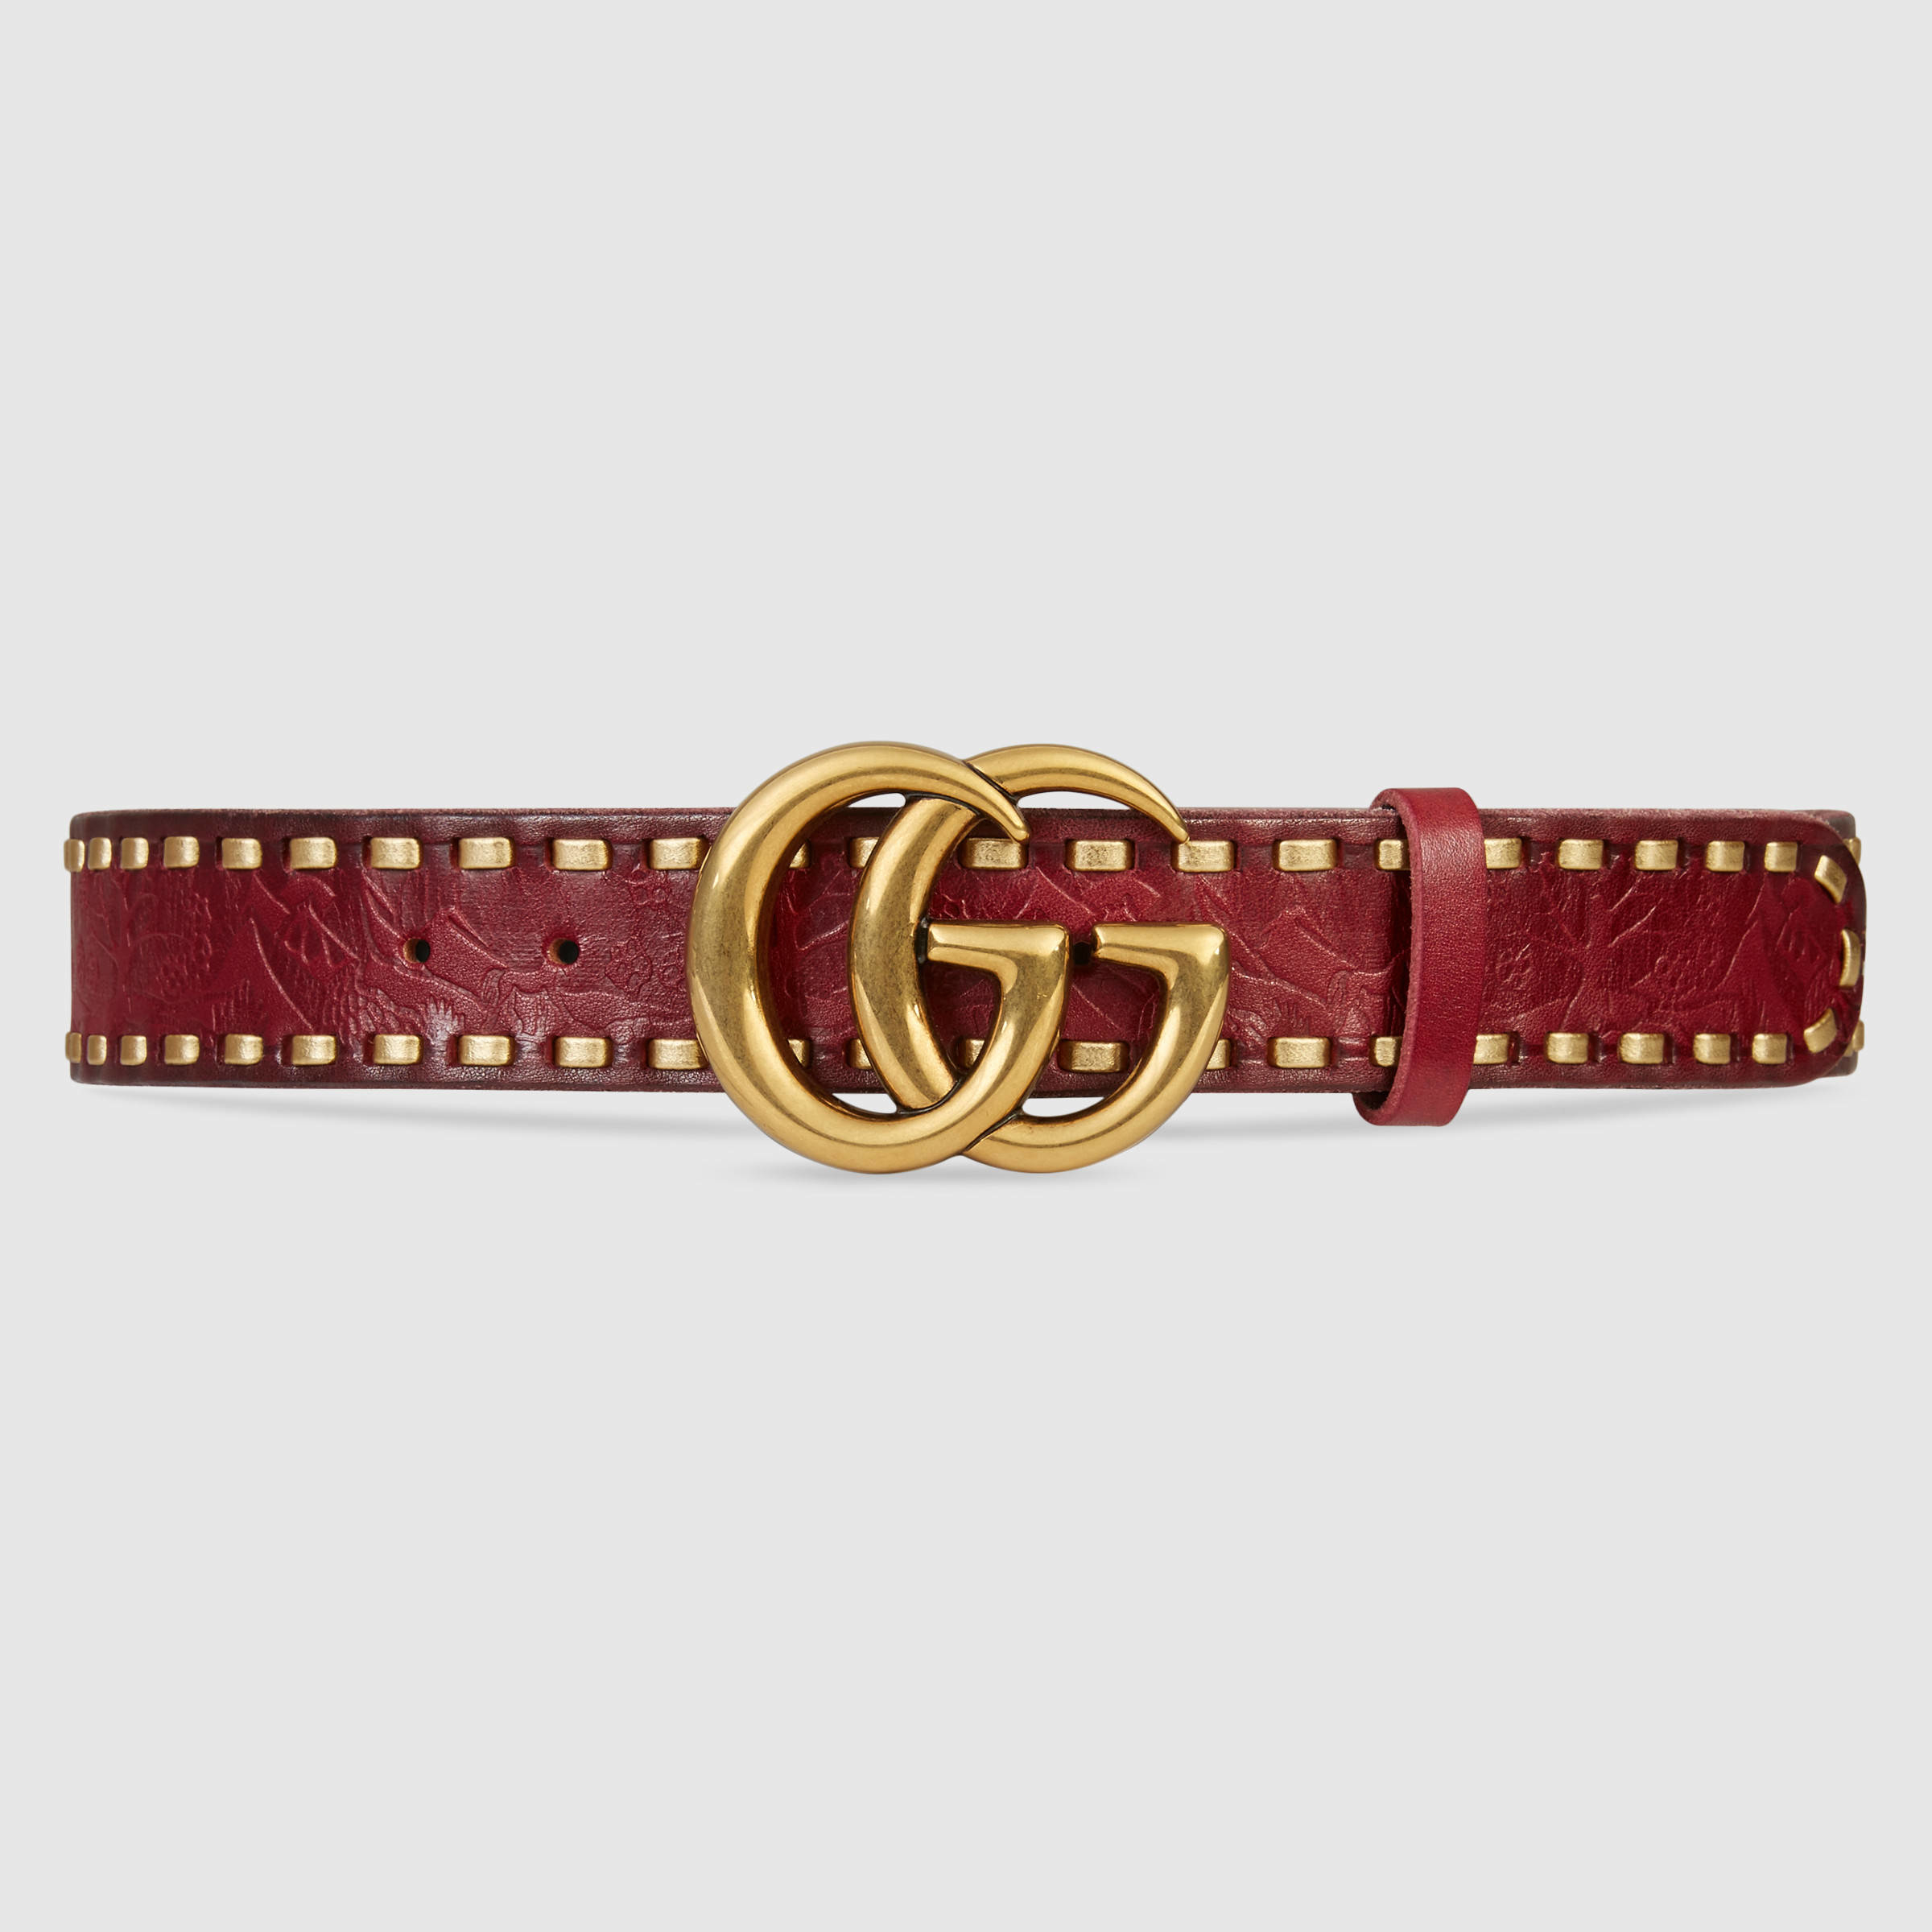 Lyst - Gucci Embossed Belt With Double G Buckle in Red